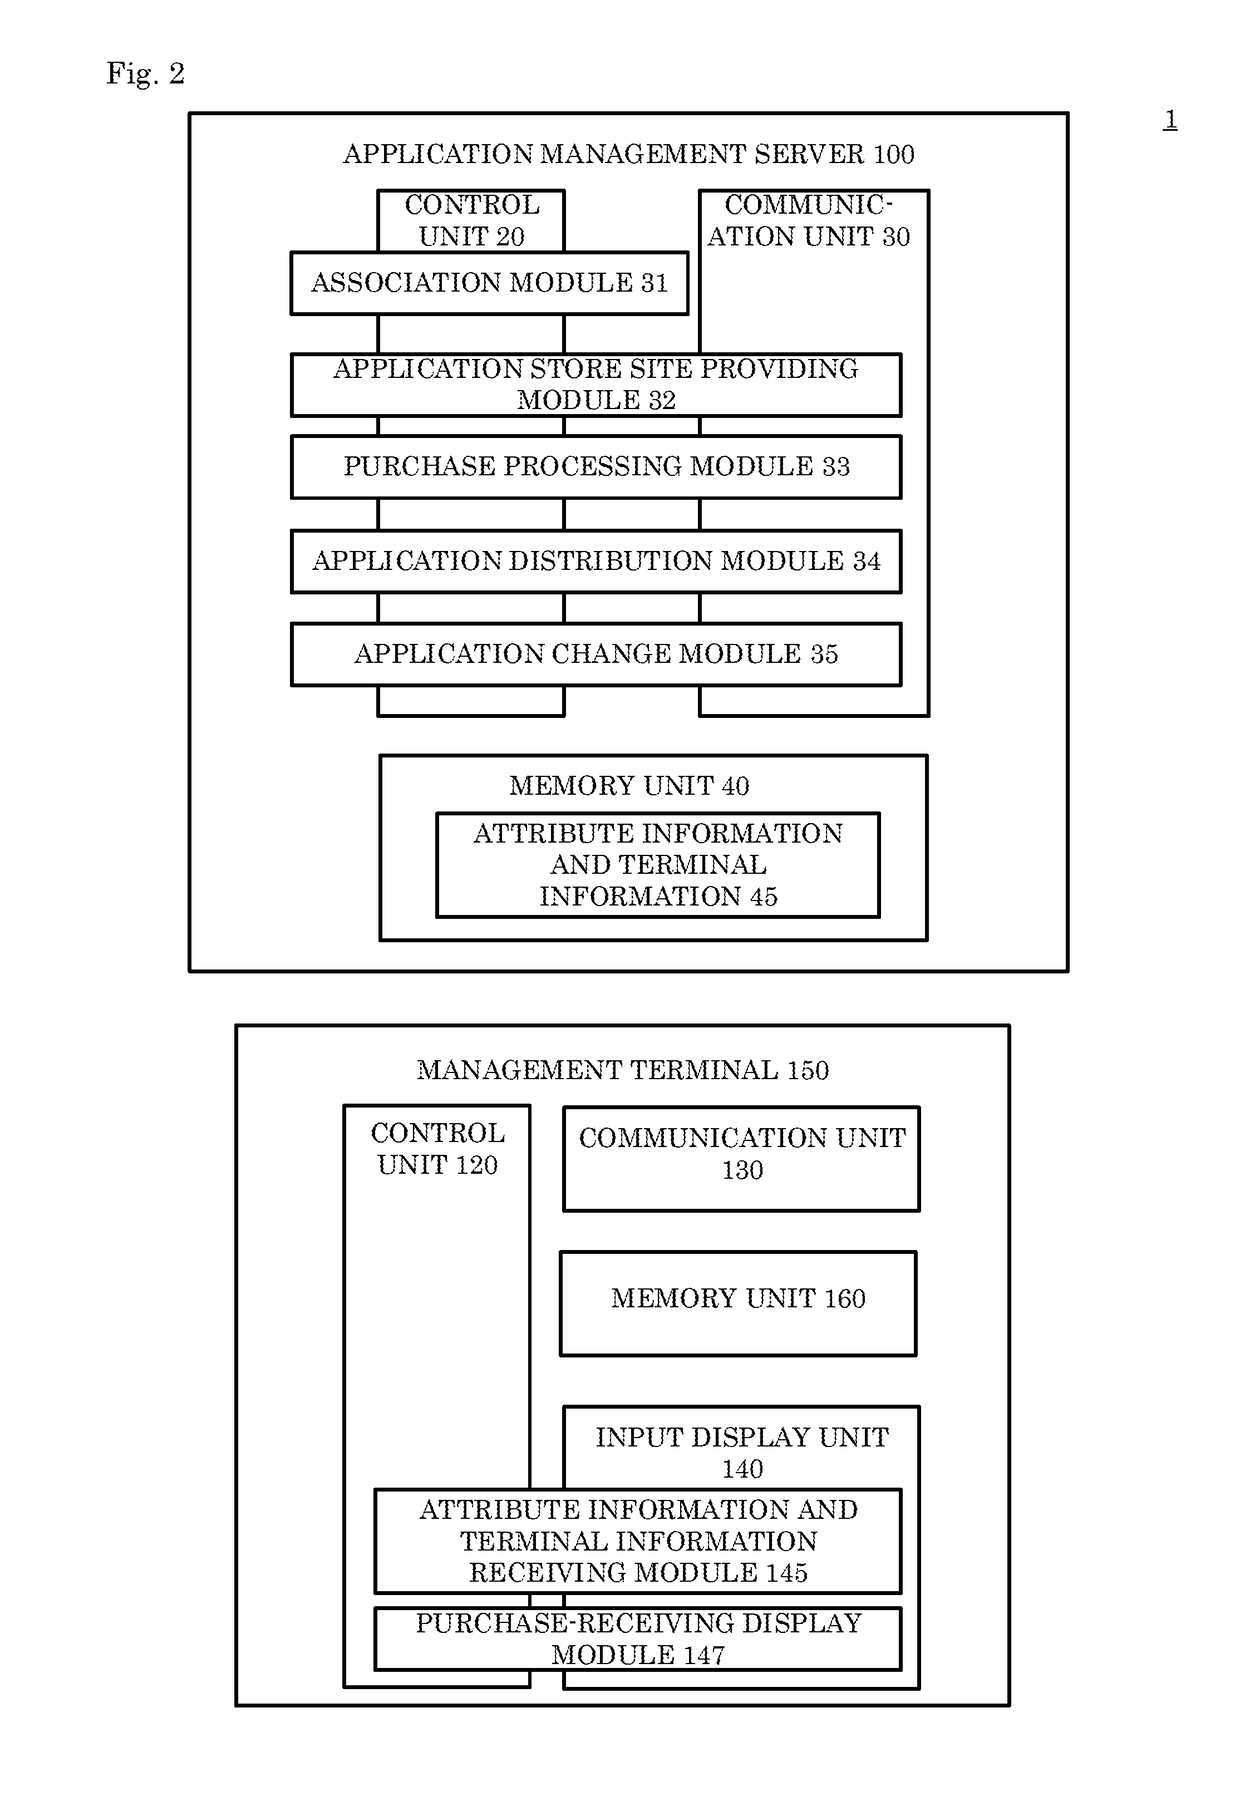 System and method for application management